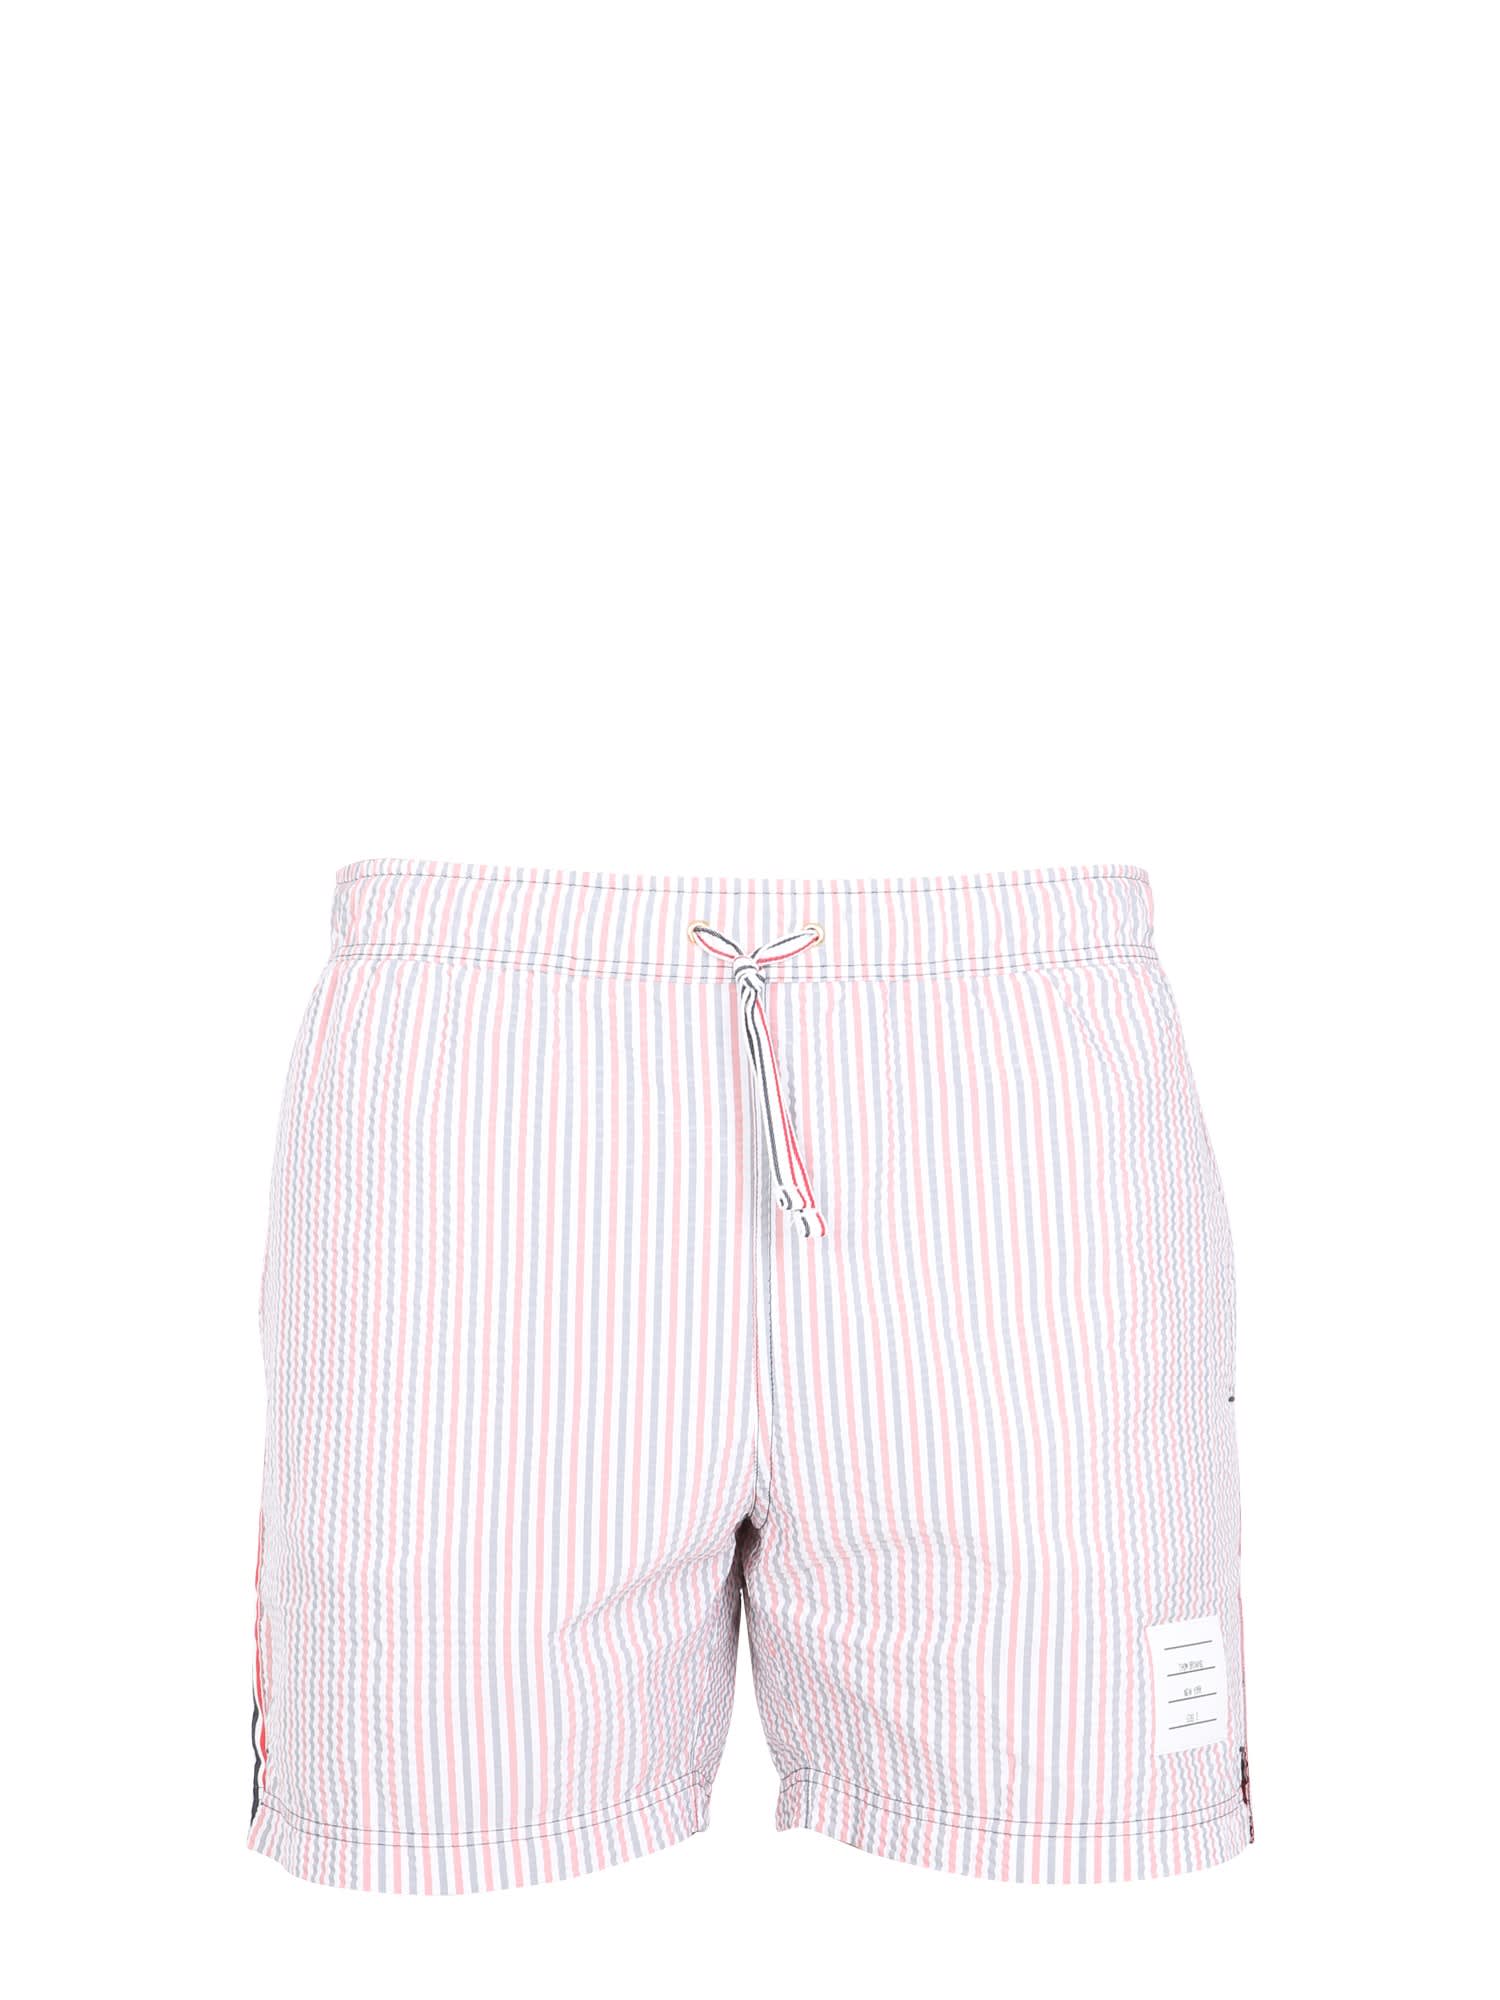 Thom Browne Swimsuit Boxers